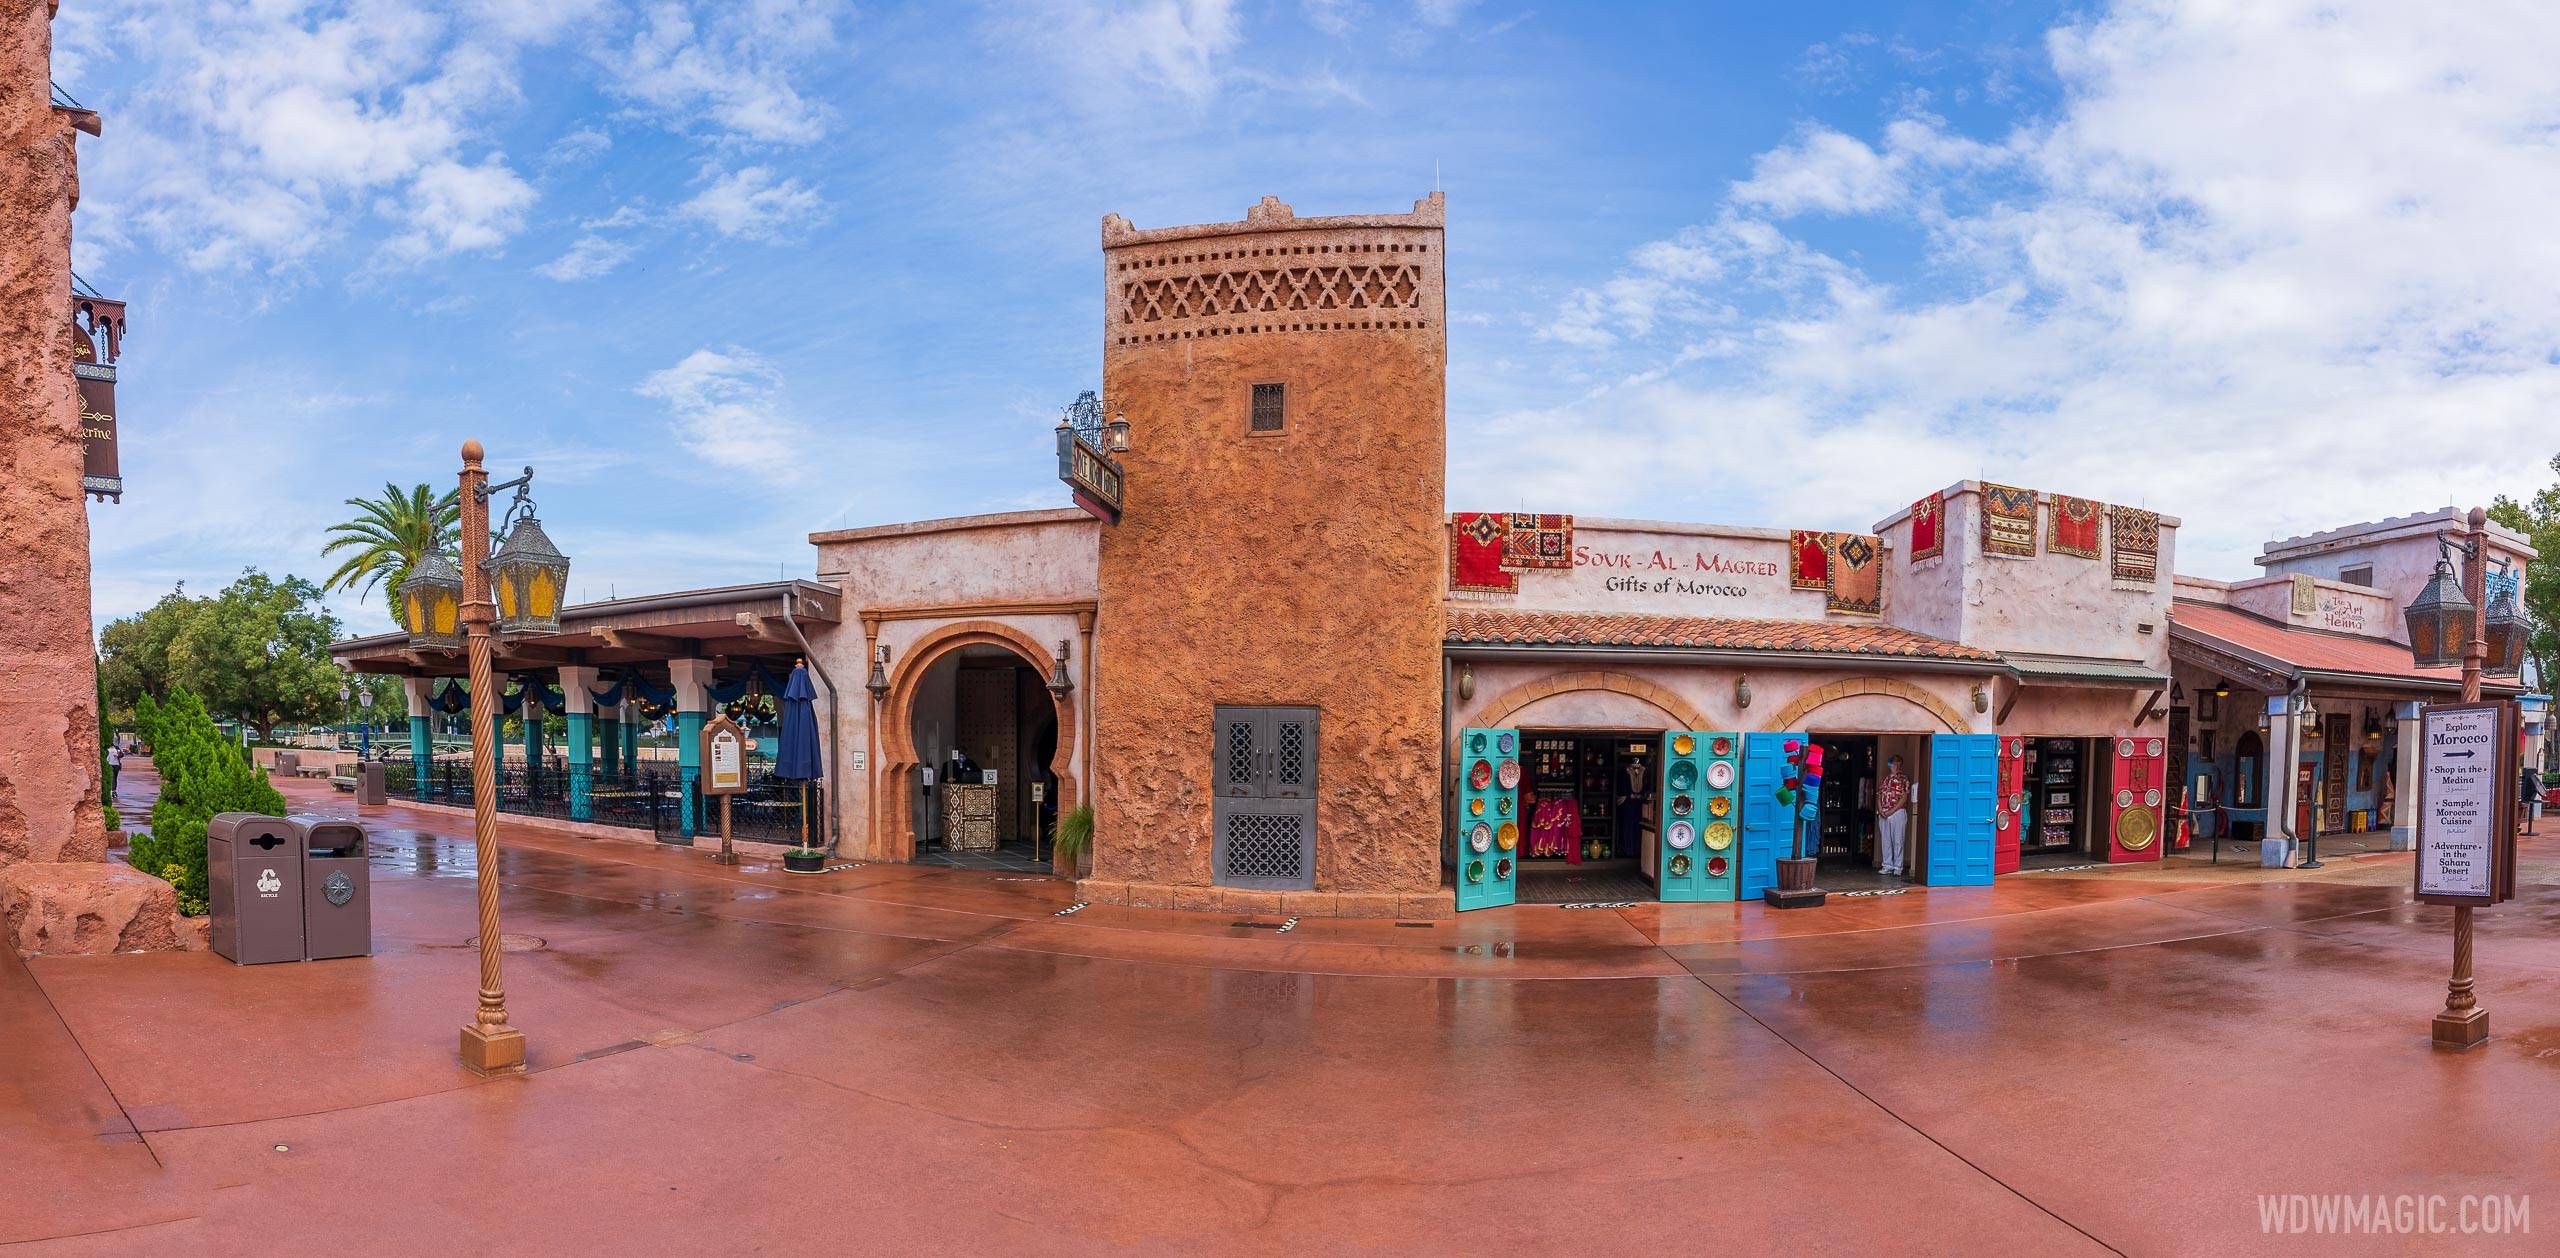 PHOTOS - A look at the updated Disney operated locations in the Morocco Pavilion at EPCOT